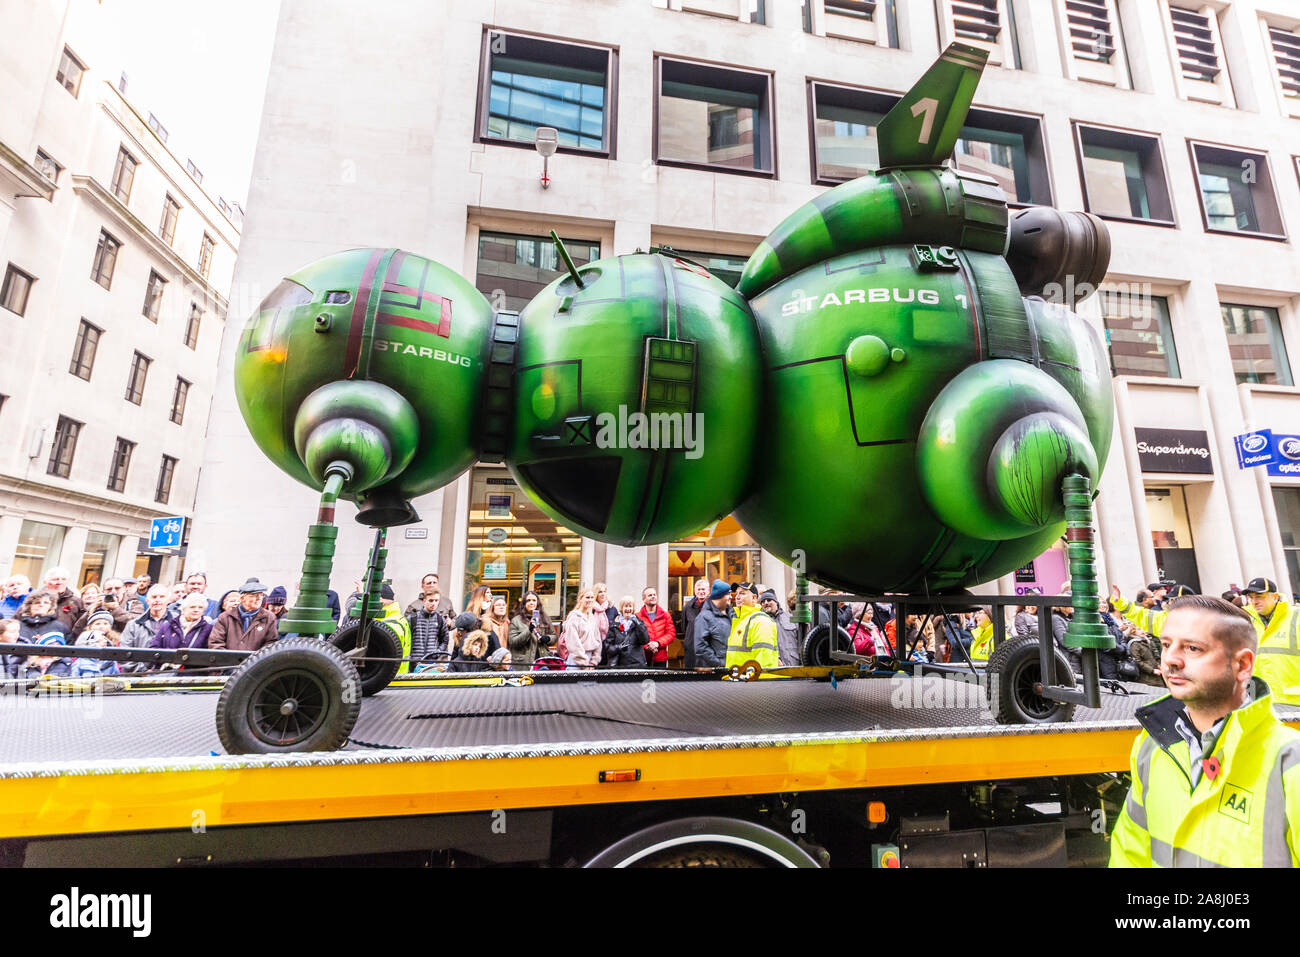 Automobile Association AA float with Red Dwarf Starbug at the Lord Mayor's Show Parade in City of London, UK. Breakdown truck Stock Photo